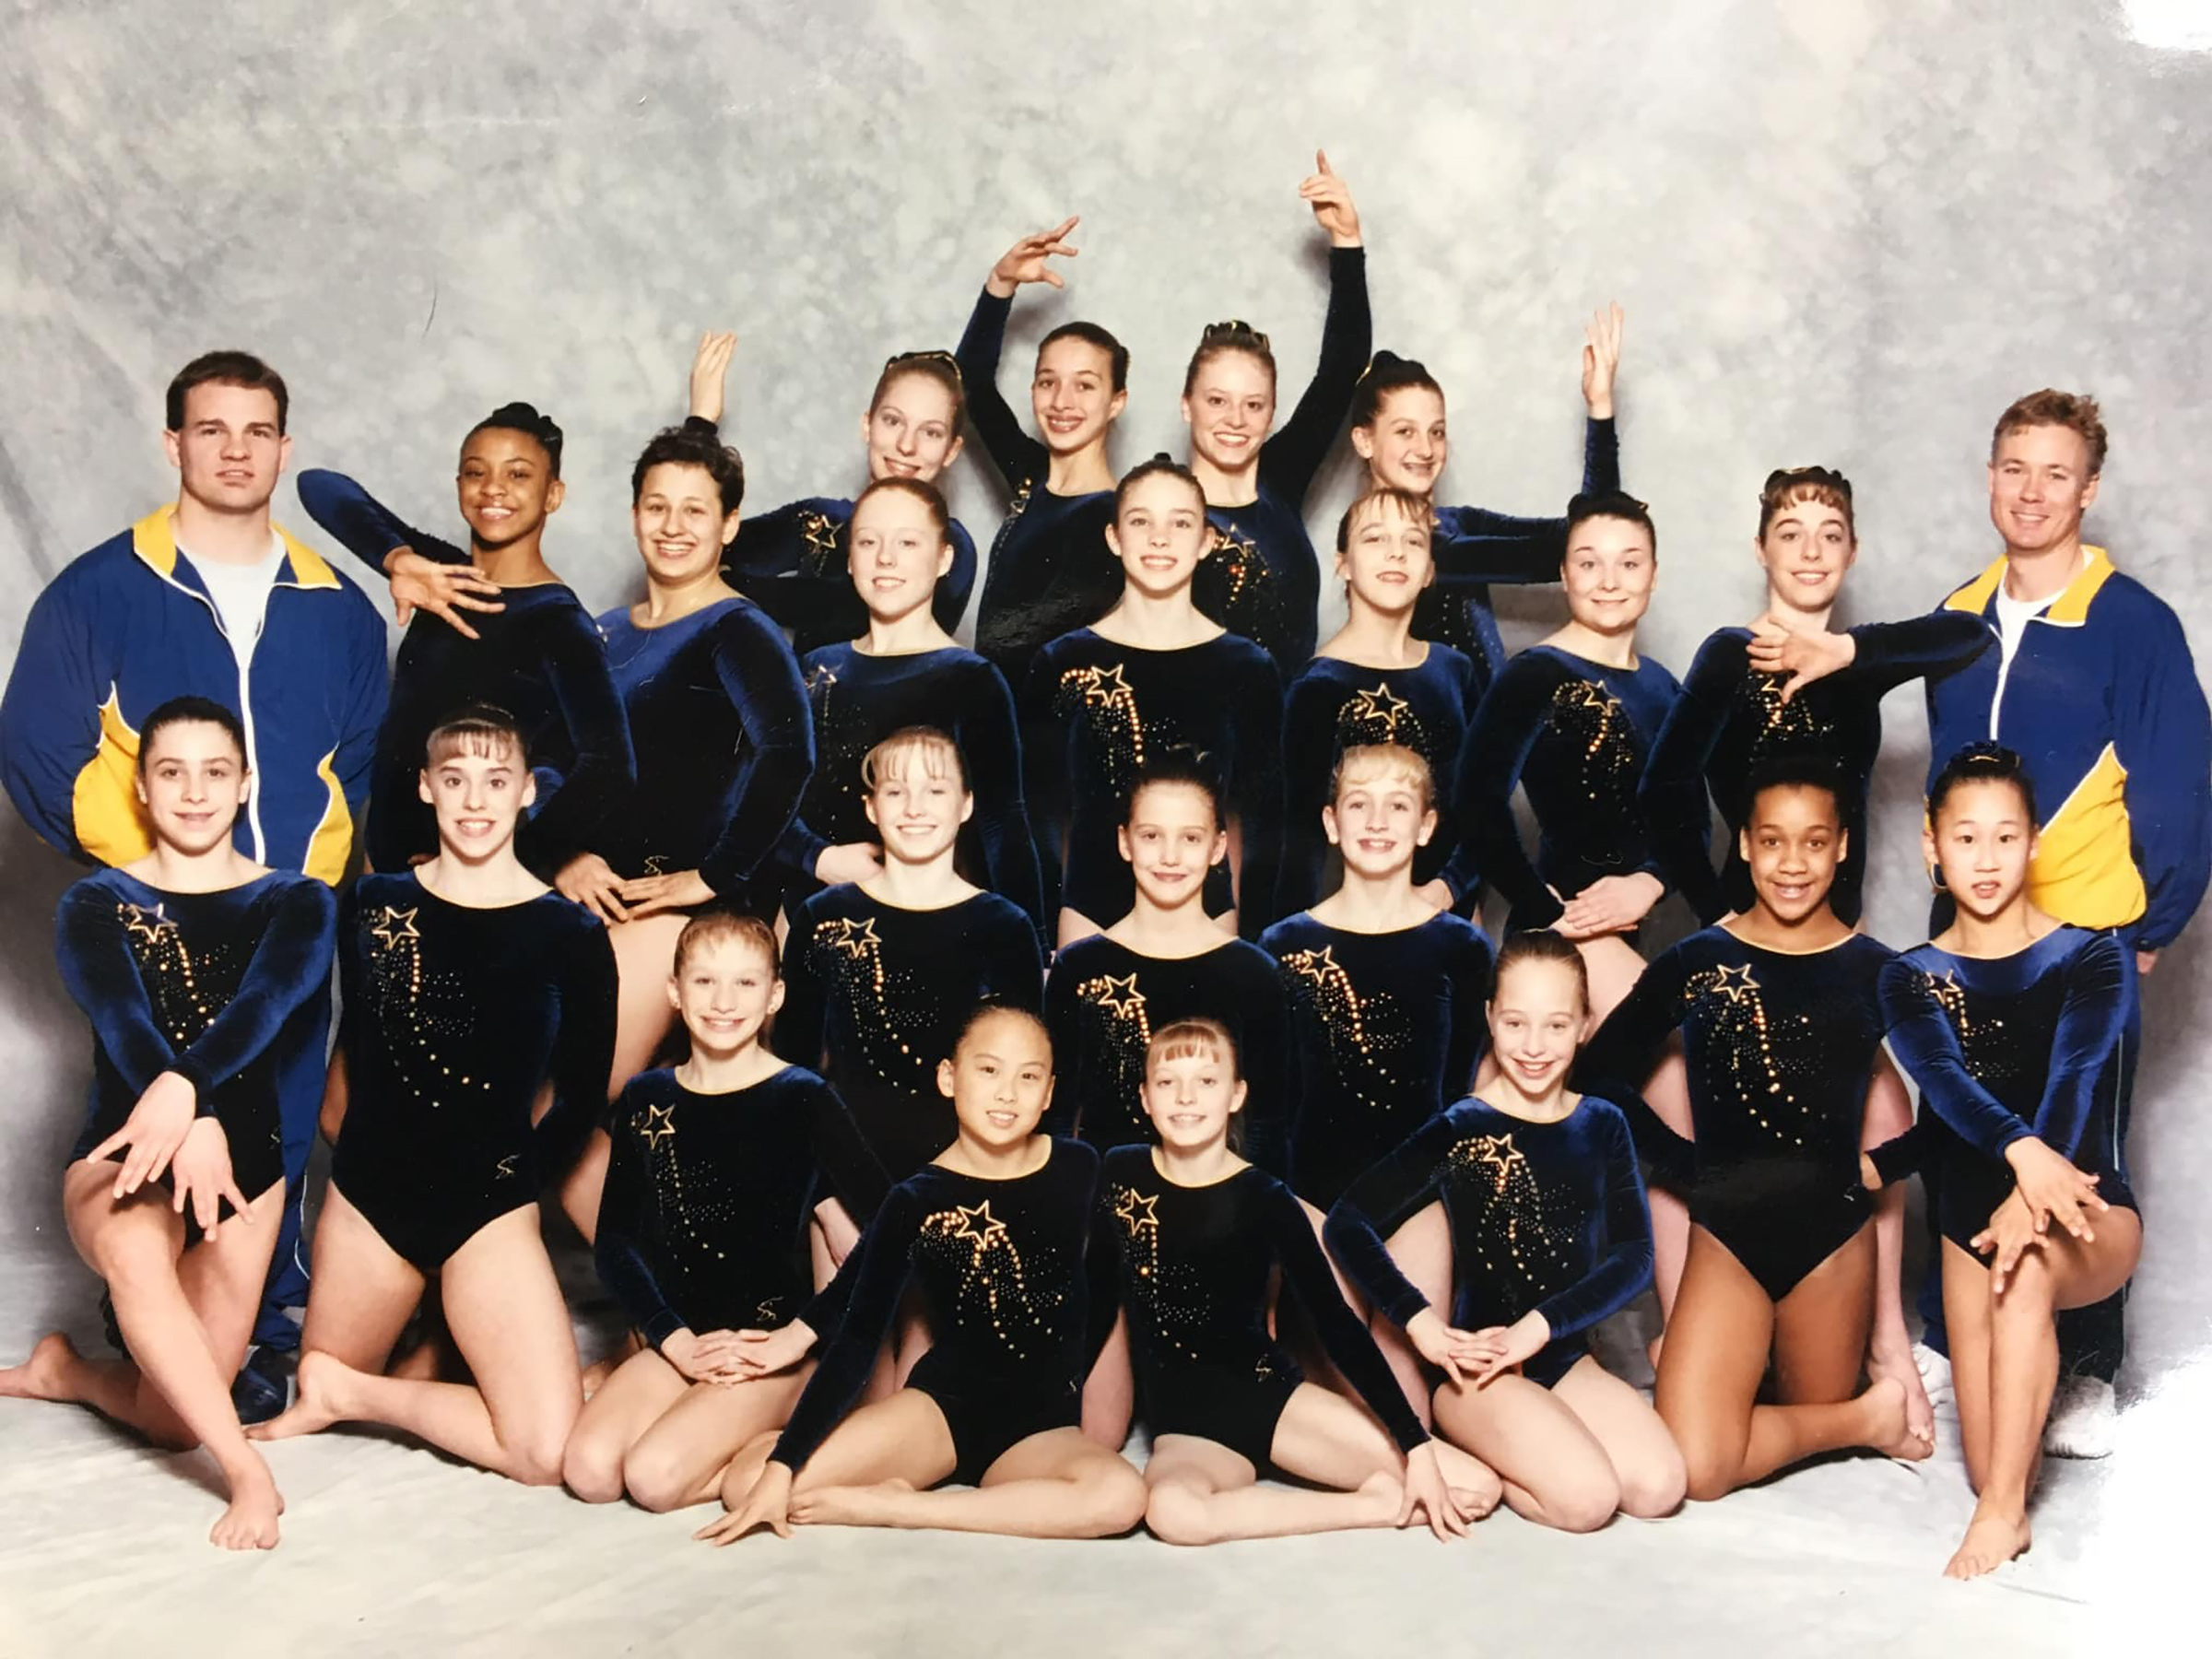 Choi, front row center, around 2000 when she was a competitive gymnast living in Kentucky.